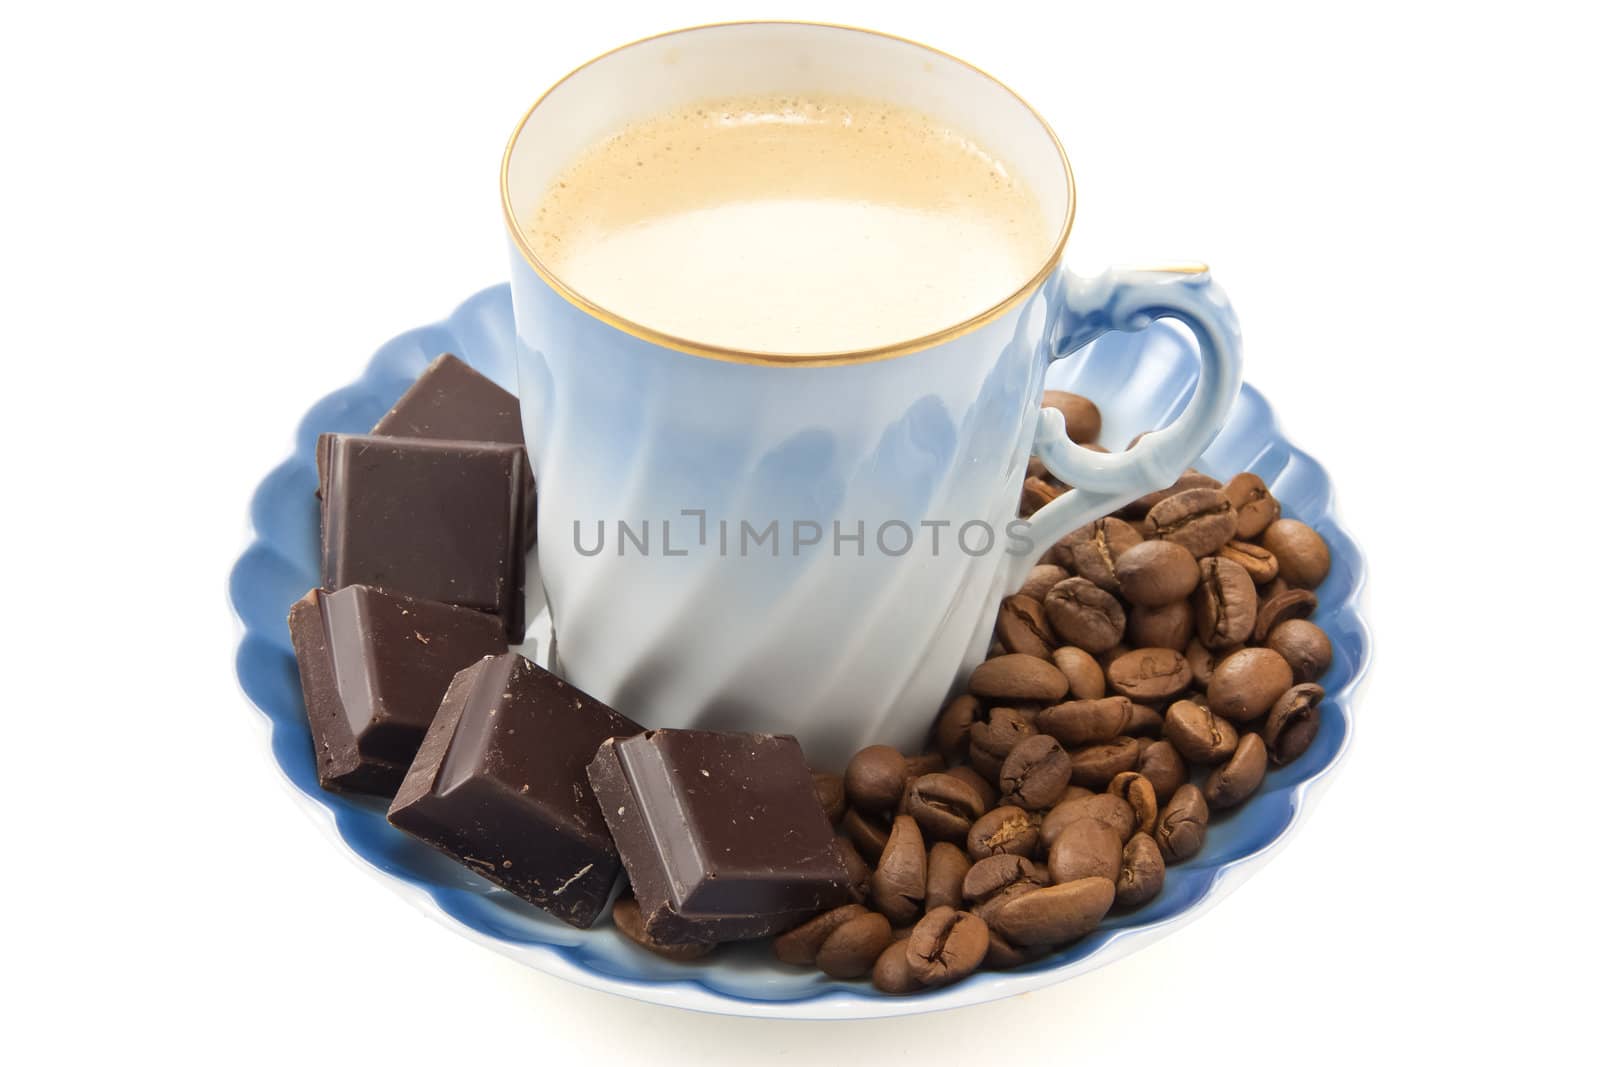 Picture of a small coffe cup with coffee and chocolate and coffe beans on the side